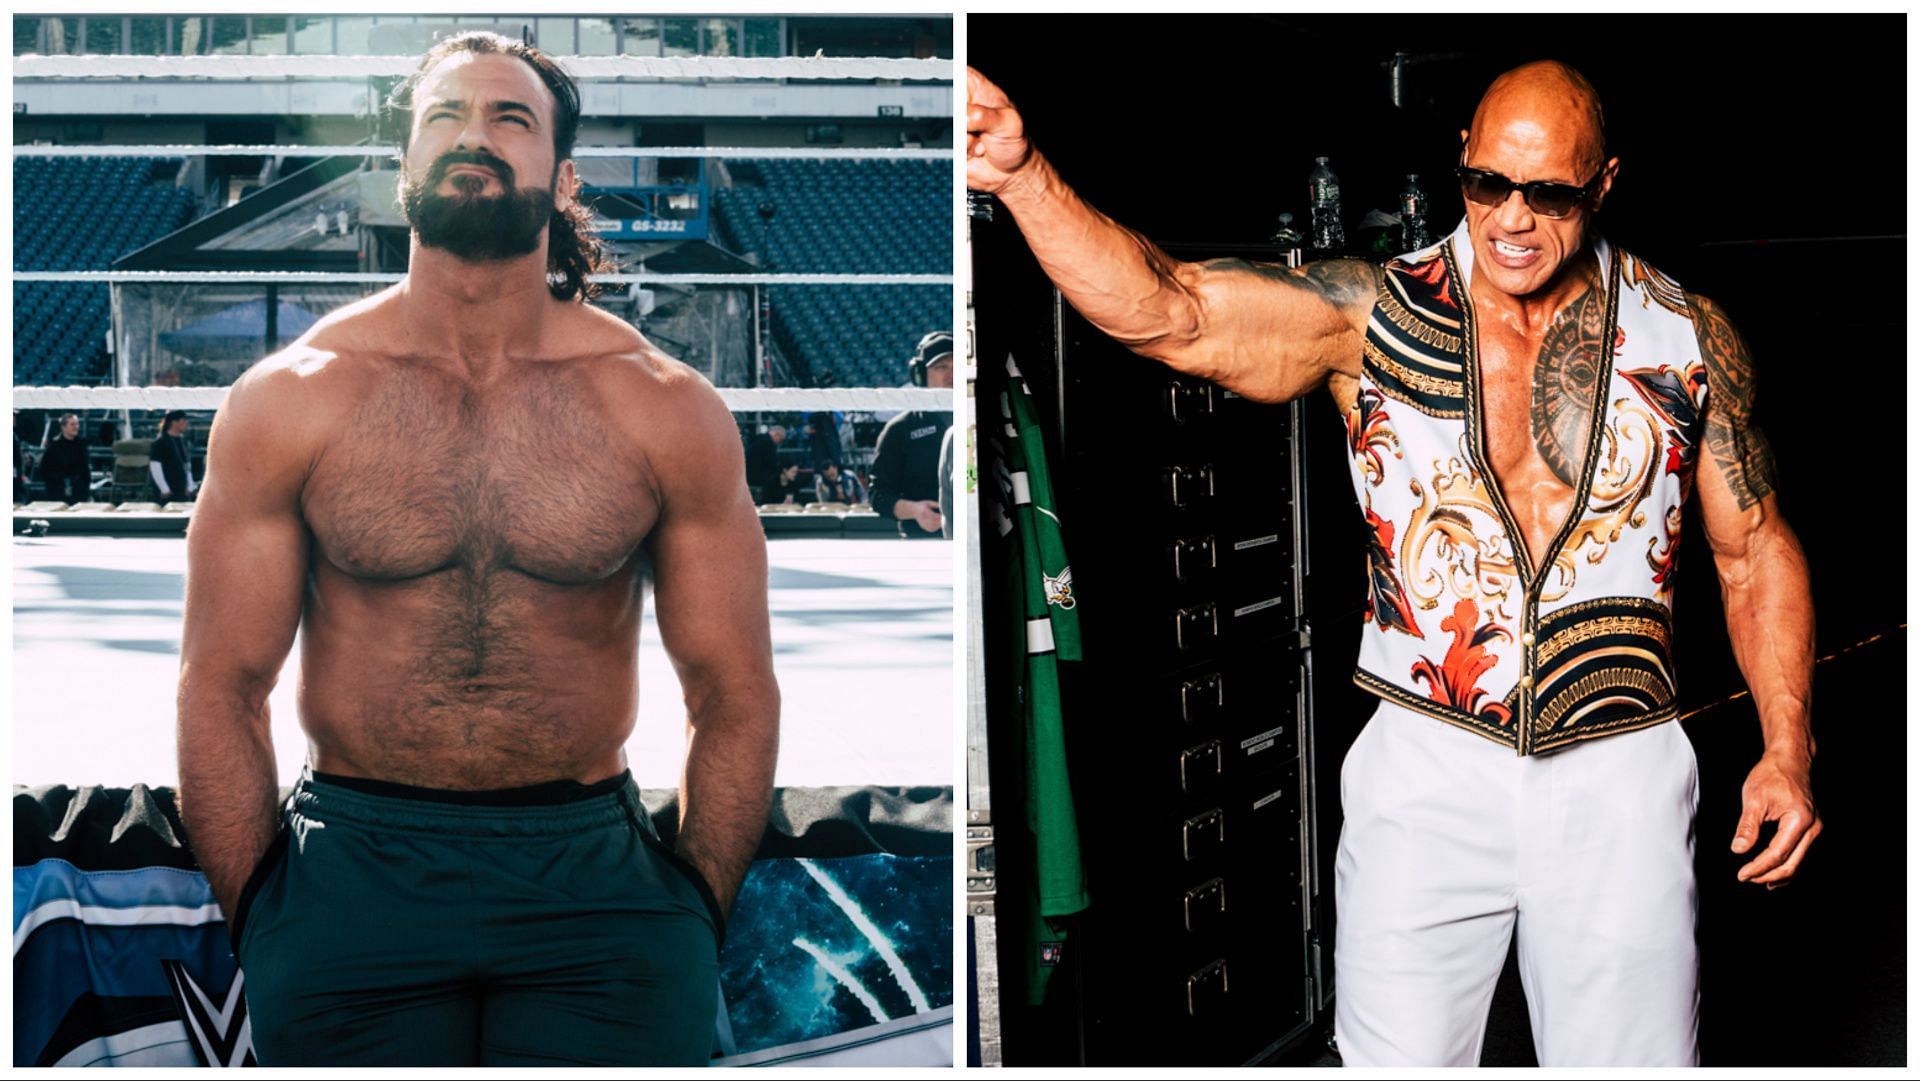 Drew McIntyre waits for WrestleMania XL Sunday, The Rock backstage at WrestleMania